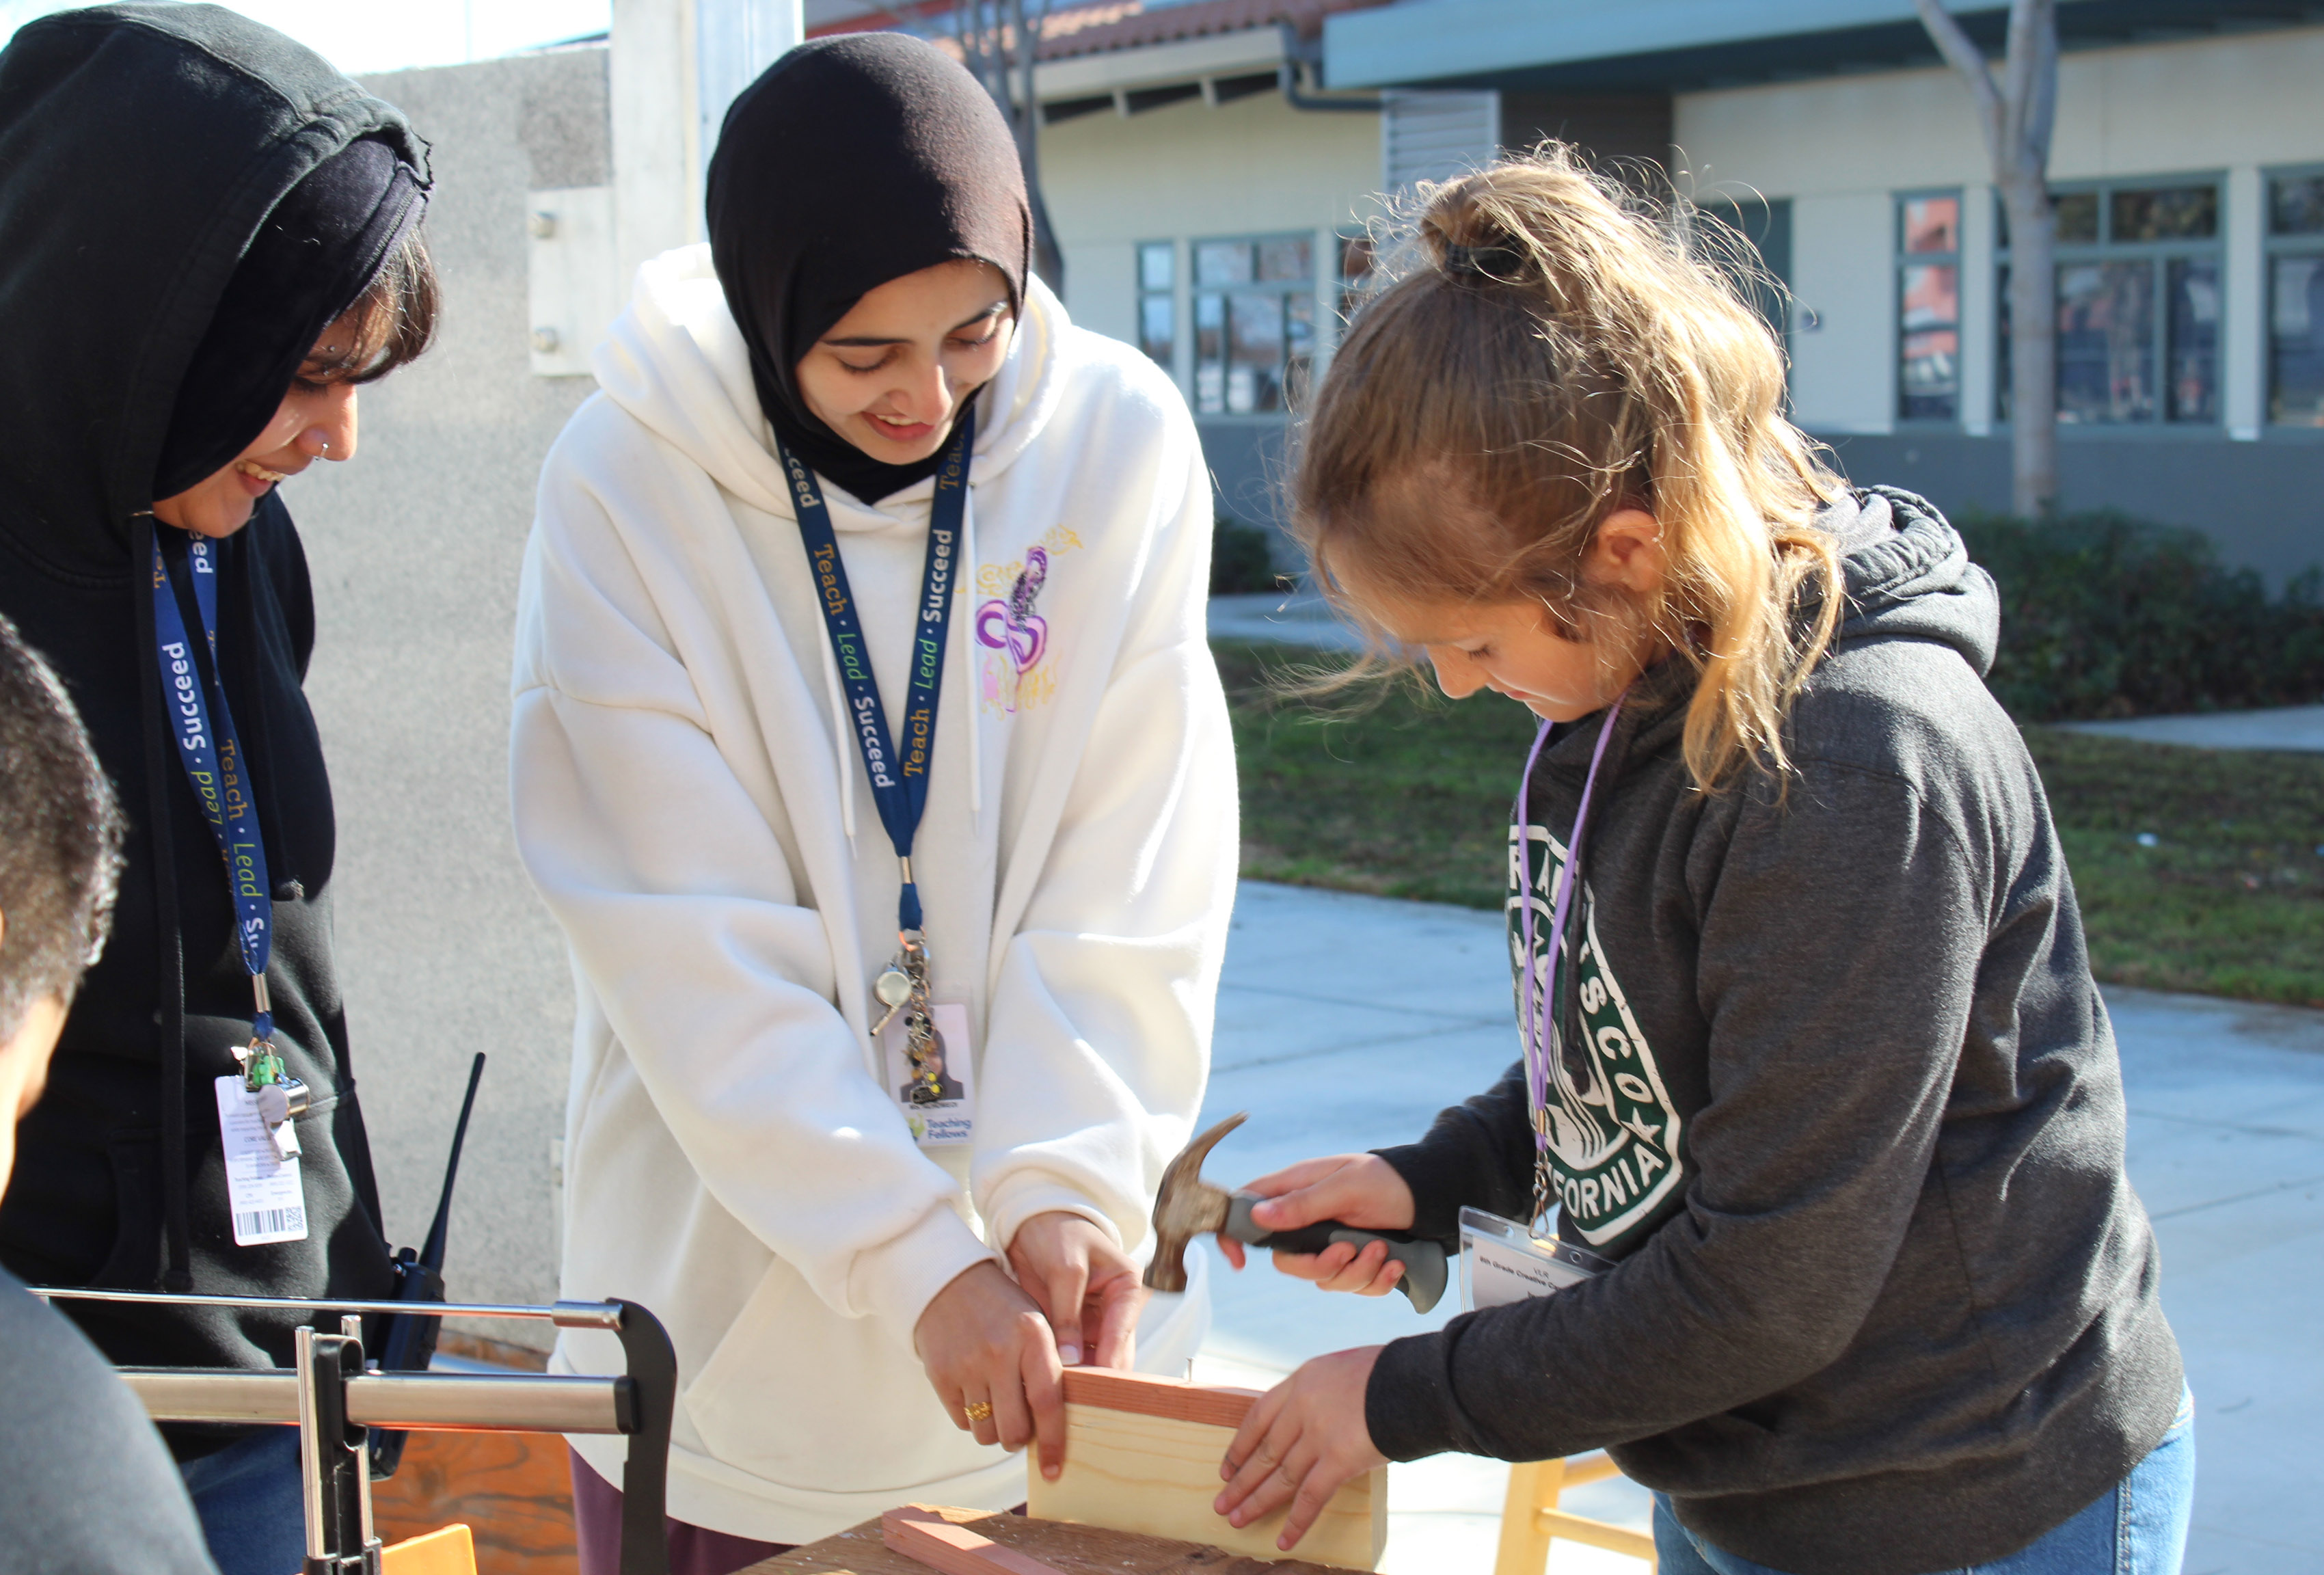 Woman wearing a white hoodie working with student using a hammer.